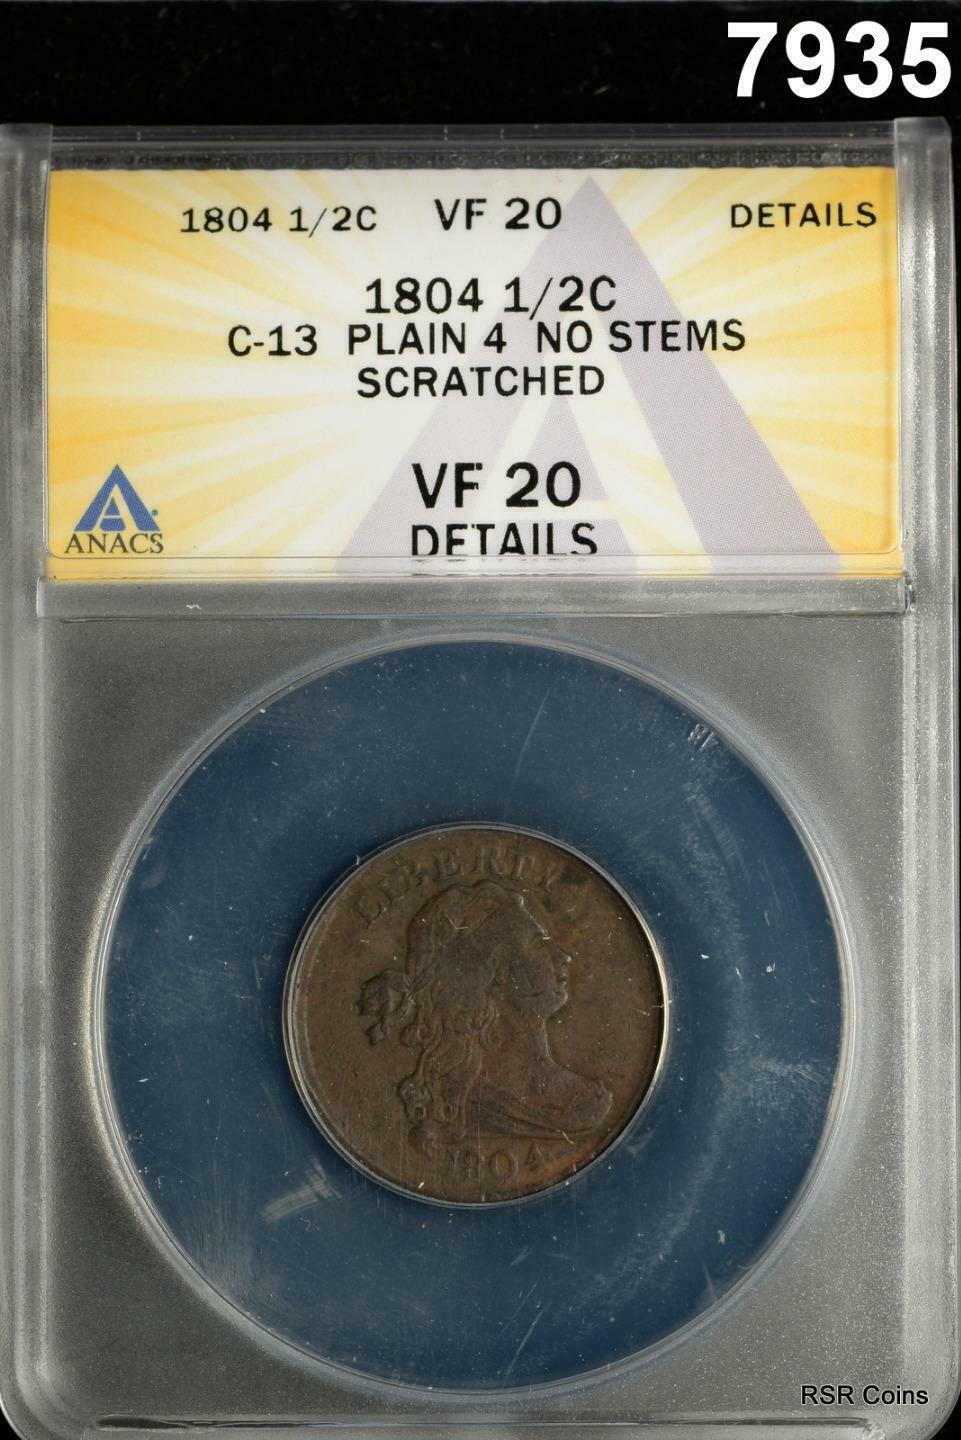 1804 HALF CENT C-13 PLAIN 4 NO STEMS ANACS CERTIFIED VF20 SCRATCHED #7935